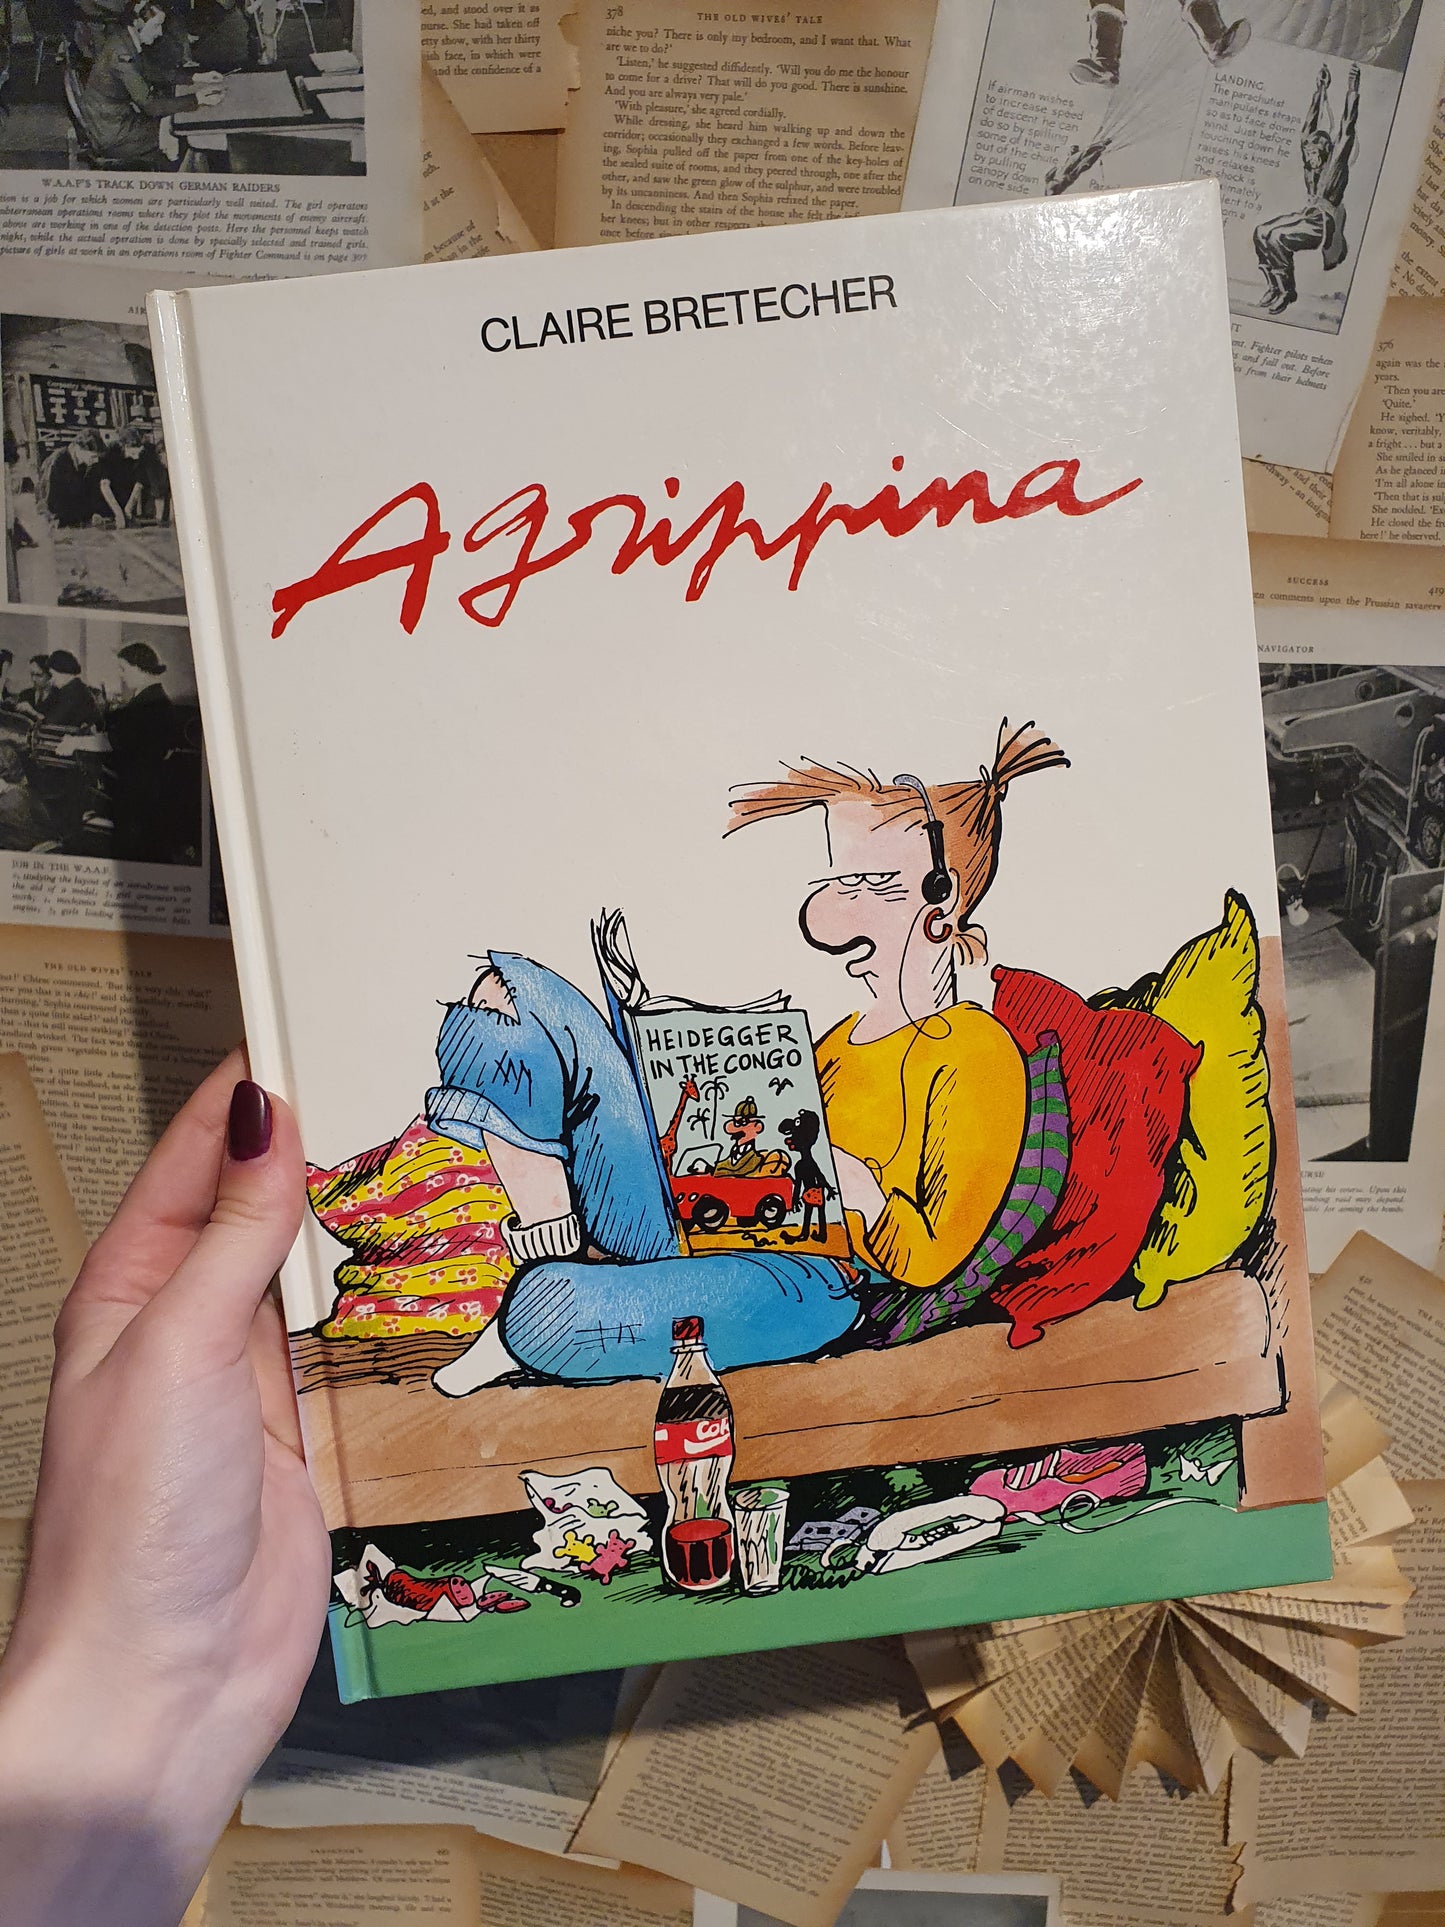 Agripina by Clare Bretcher (1991)